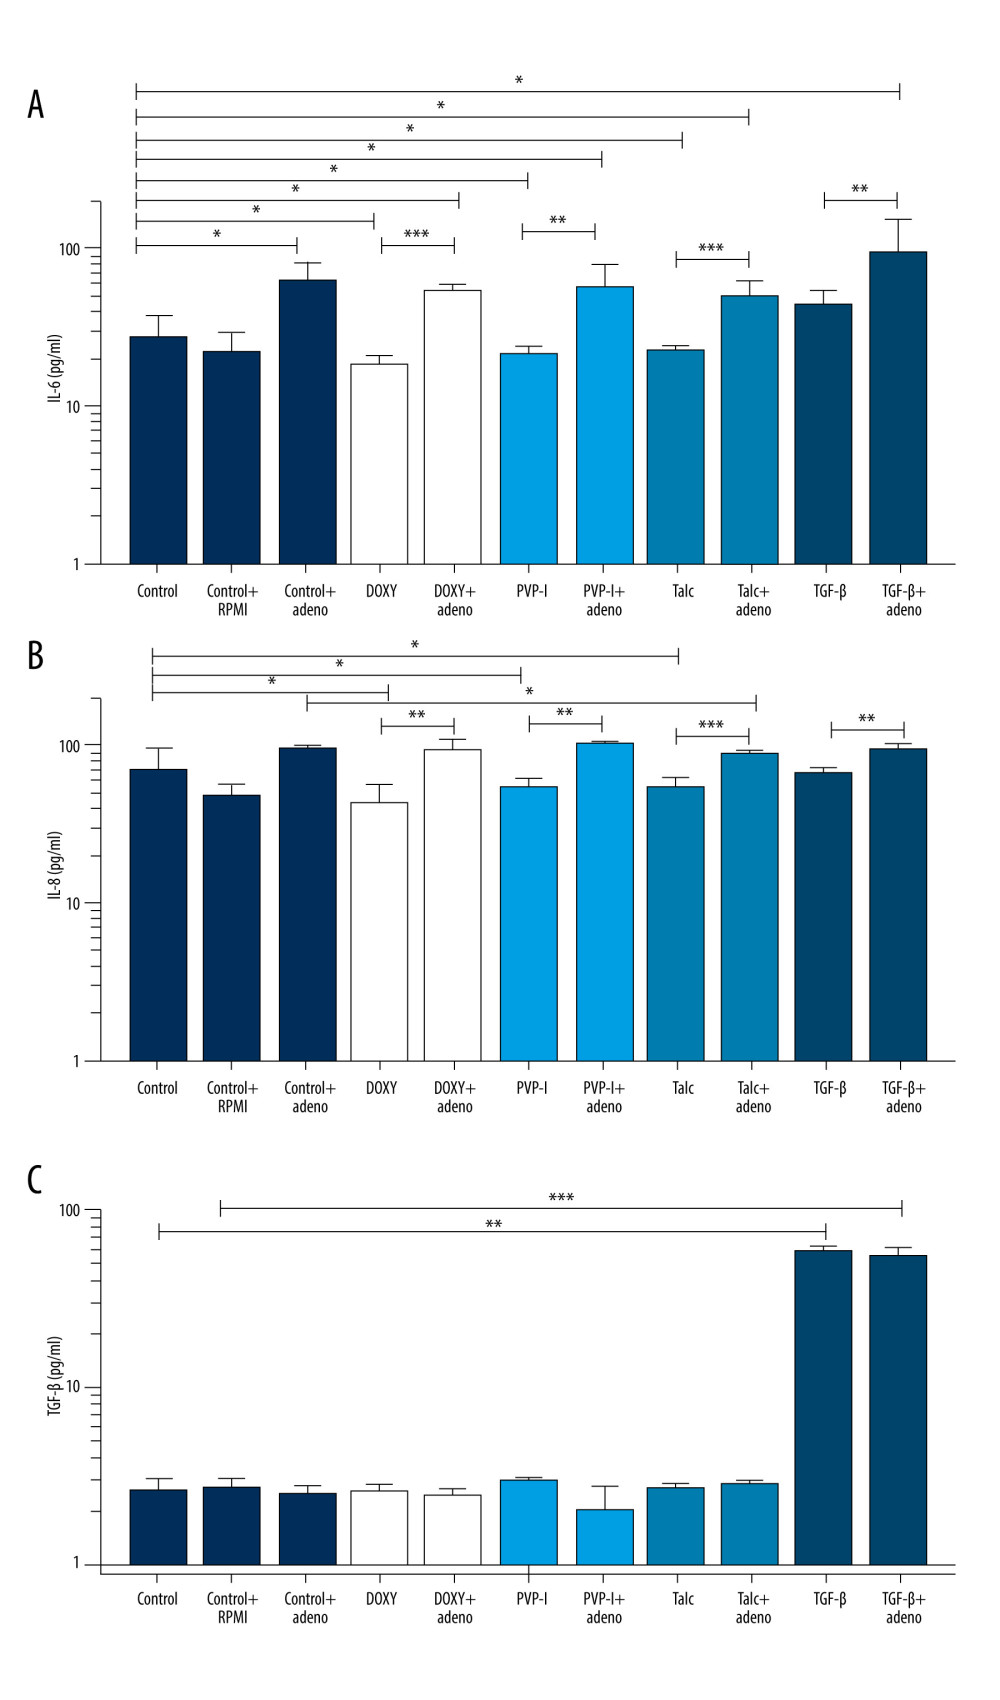 (A–C) IL-6, IL-8, and TGFβ protein levels in mesothelial cell culture supernatants stimulated with sclerosants (doxycycline, PVP-I, talc, and TGF-β) cultivated with or without adenocarcinoma cell supernatant addition. Data are presented as median with interquartile range. DOXY – doxycycline; PVP-I – iodopovidone; TGF-β – transforming growth factor β; IL-6, IL-8 – interleukin 6 and 8; MMP9 – matrix metalloproteinase 9; MCP-1 – monocyte chemoattractant protein; RPMI – Roswell Park Memorial Institute medium. The figure was created using GraphPad Prism software (version 9.3.1). GraphPad Software, Inc., San Diego, CA, USA.